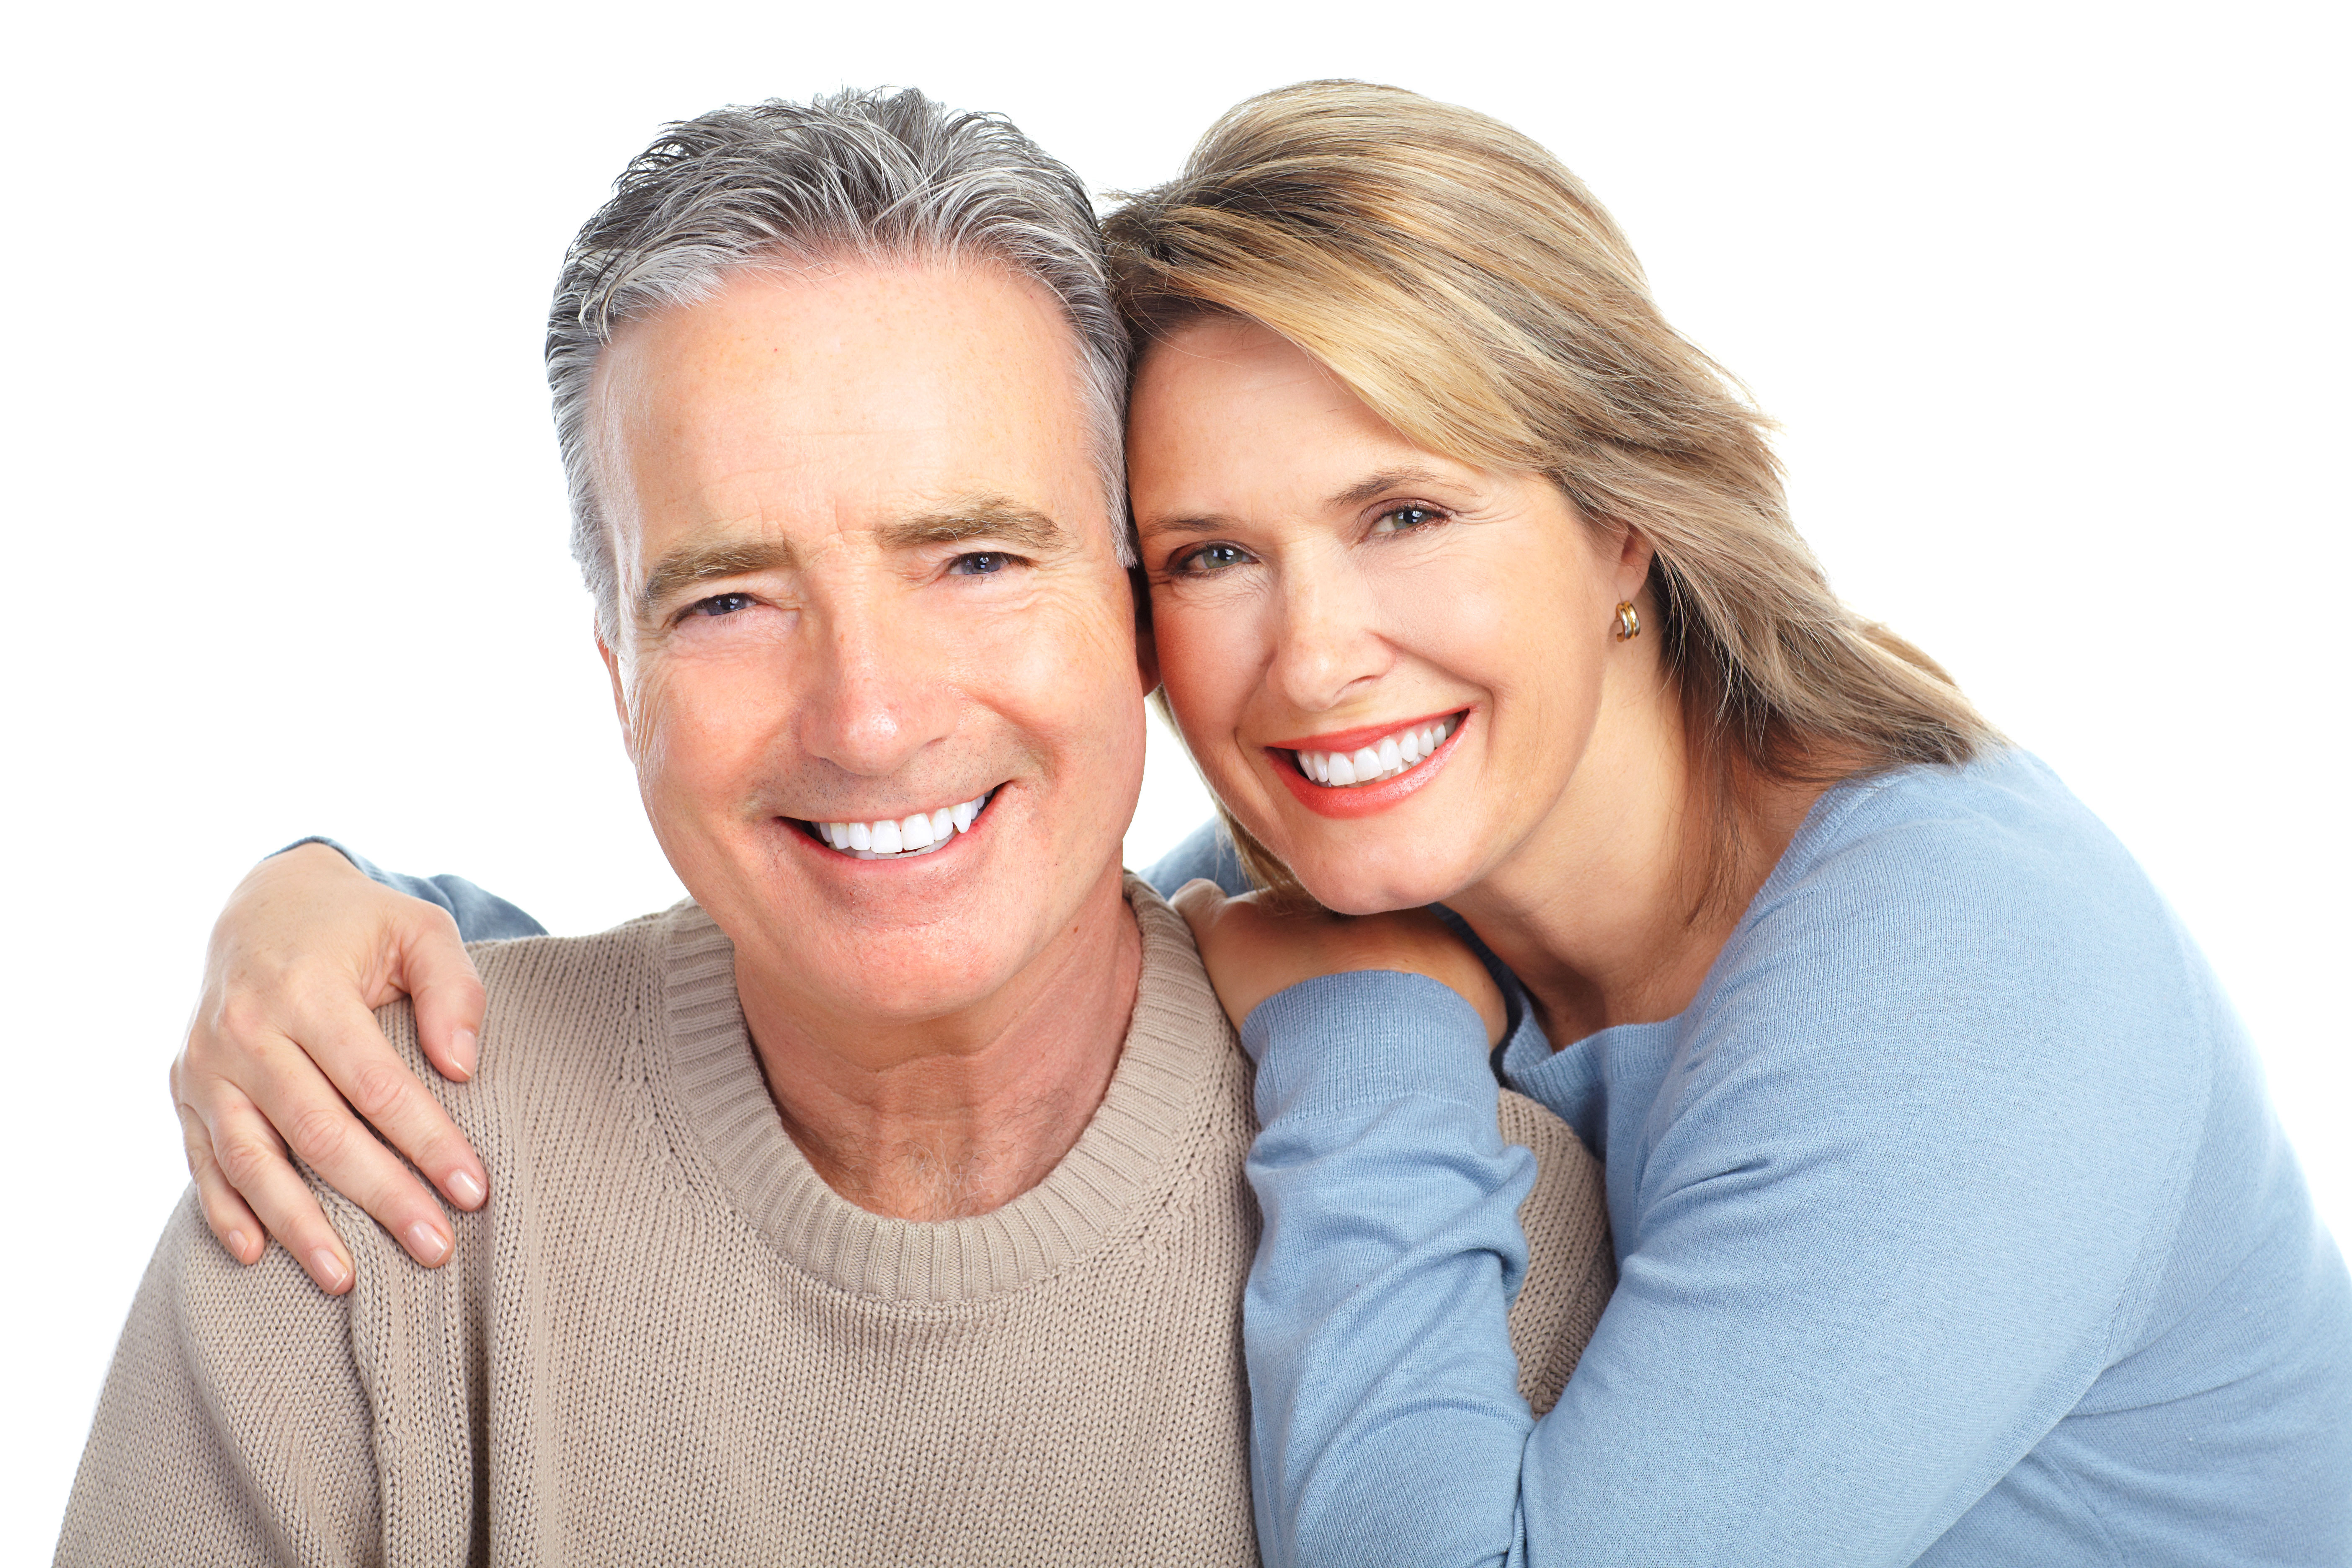 Dental Bridges Treatment in Quincy and Norwell, MA